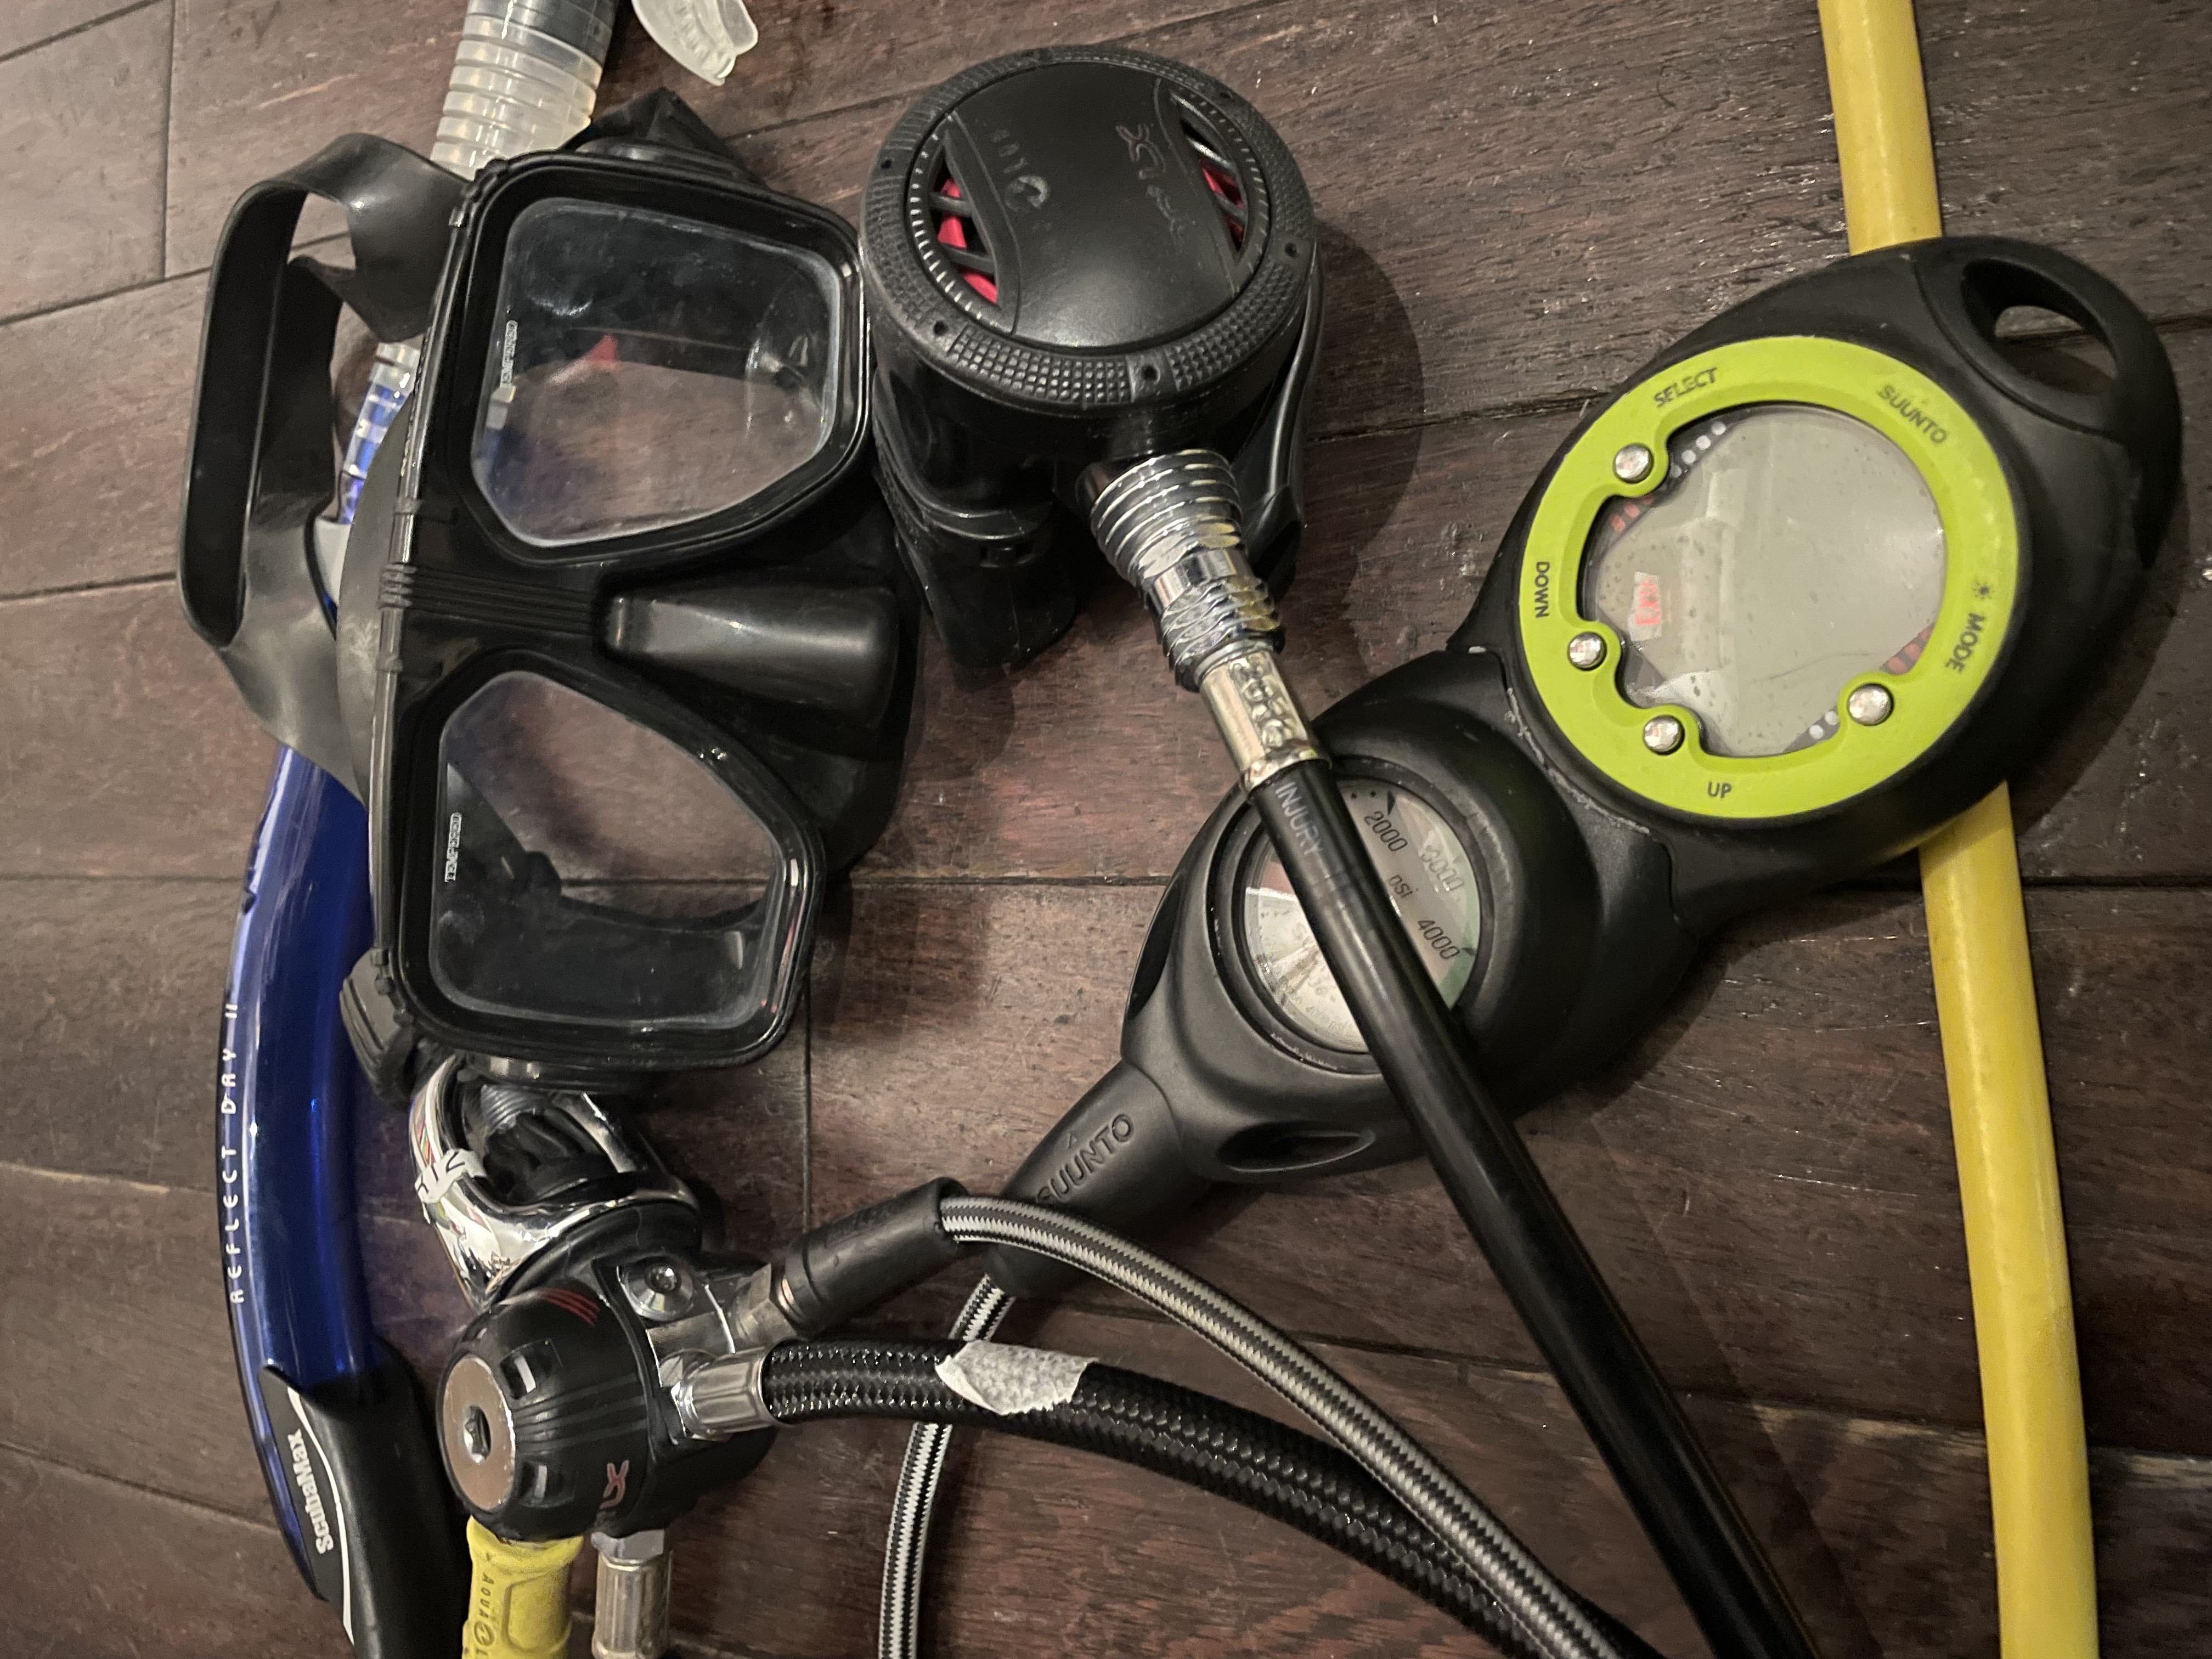 Call For Dive Gear Donations!